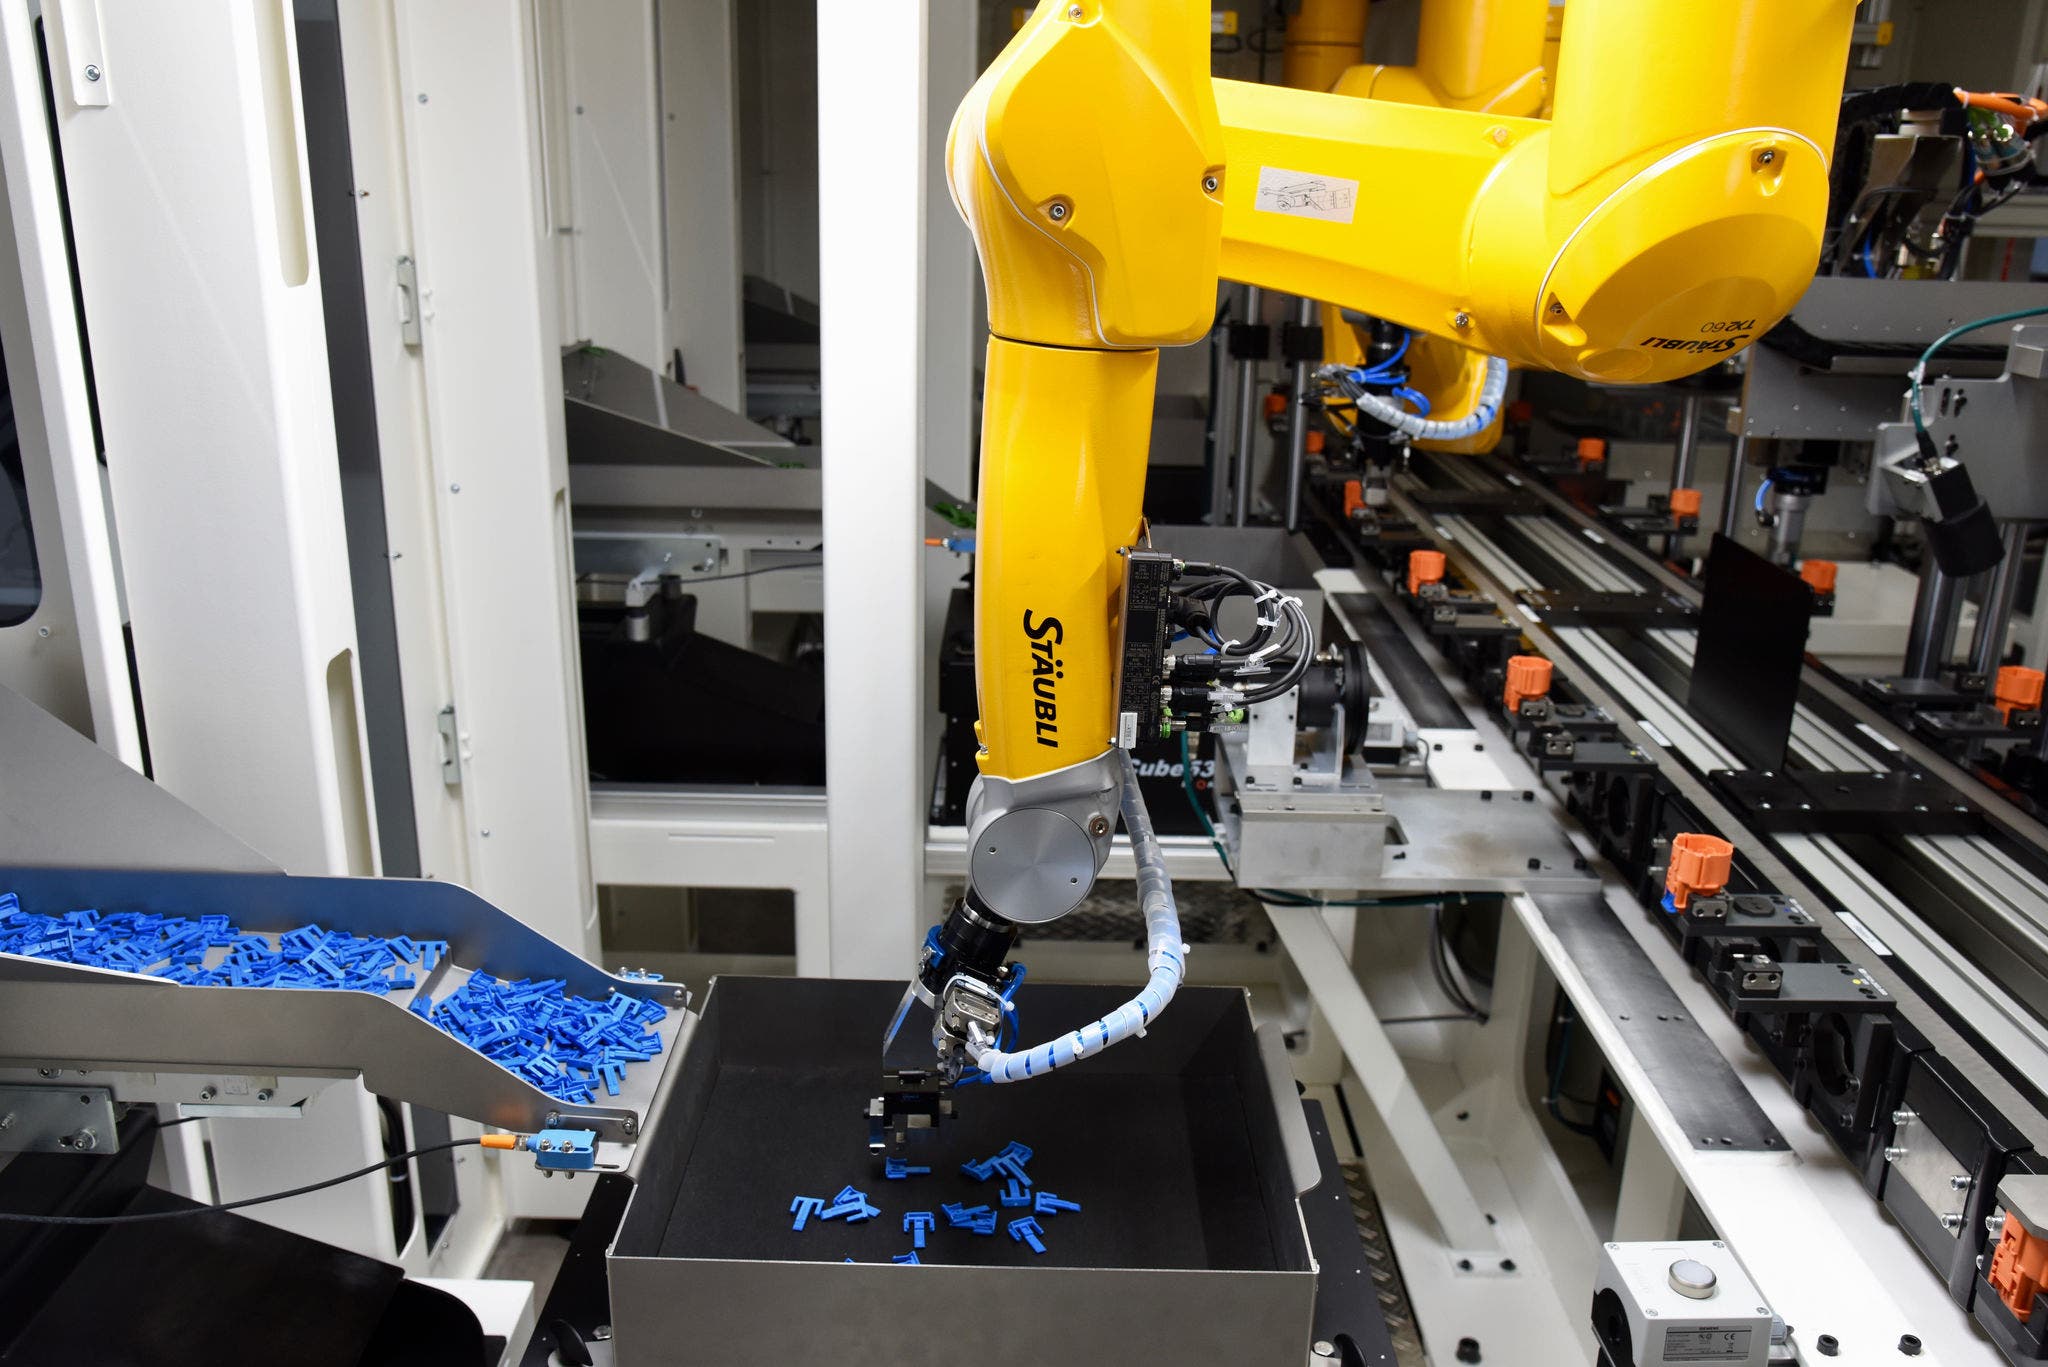 The second Stäubli six-axis robot picks up a connector lock from a vibration platform and attaches it to the connector housing.